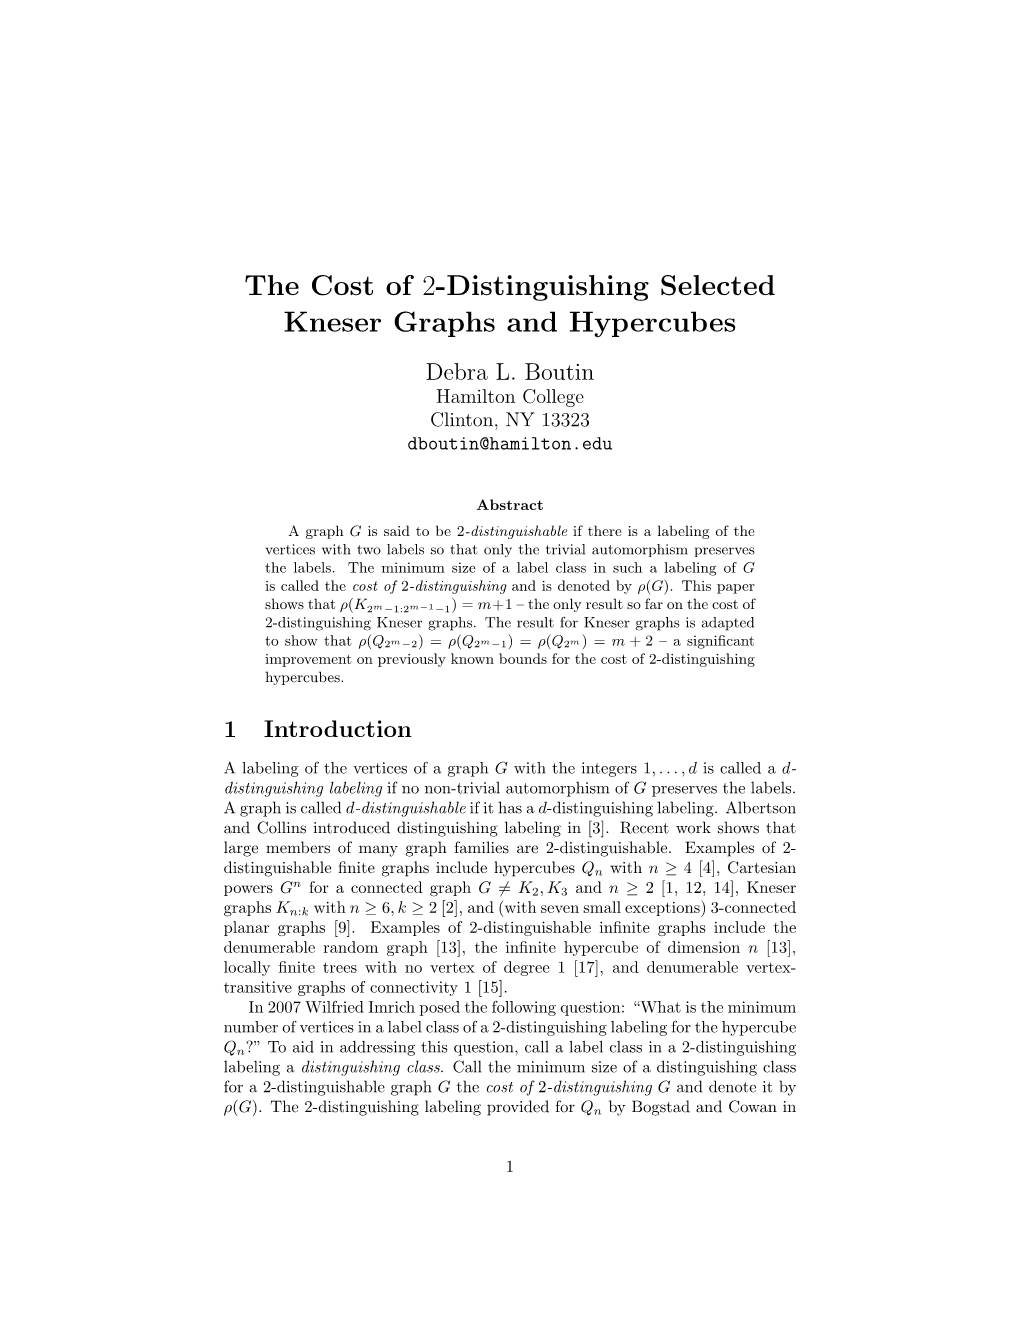 The Cost of 2-Distinguishing Selected Kneser Graphs and Hypercubes Debra L